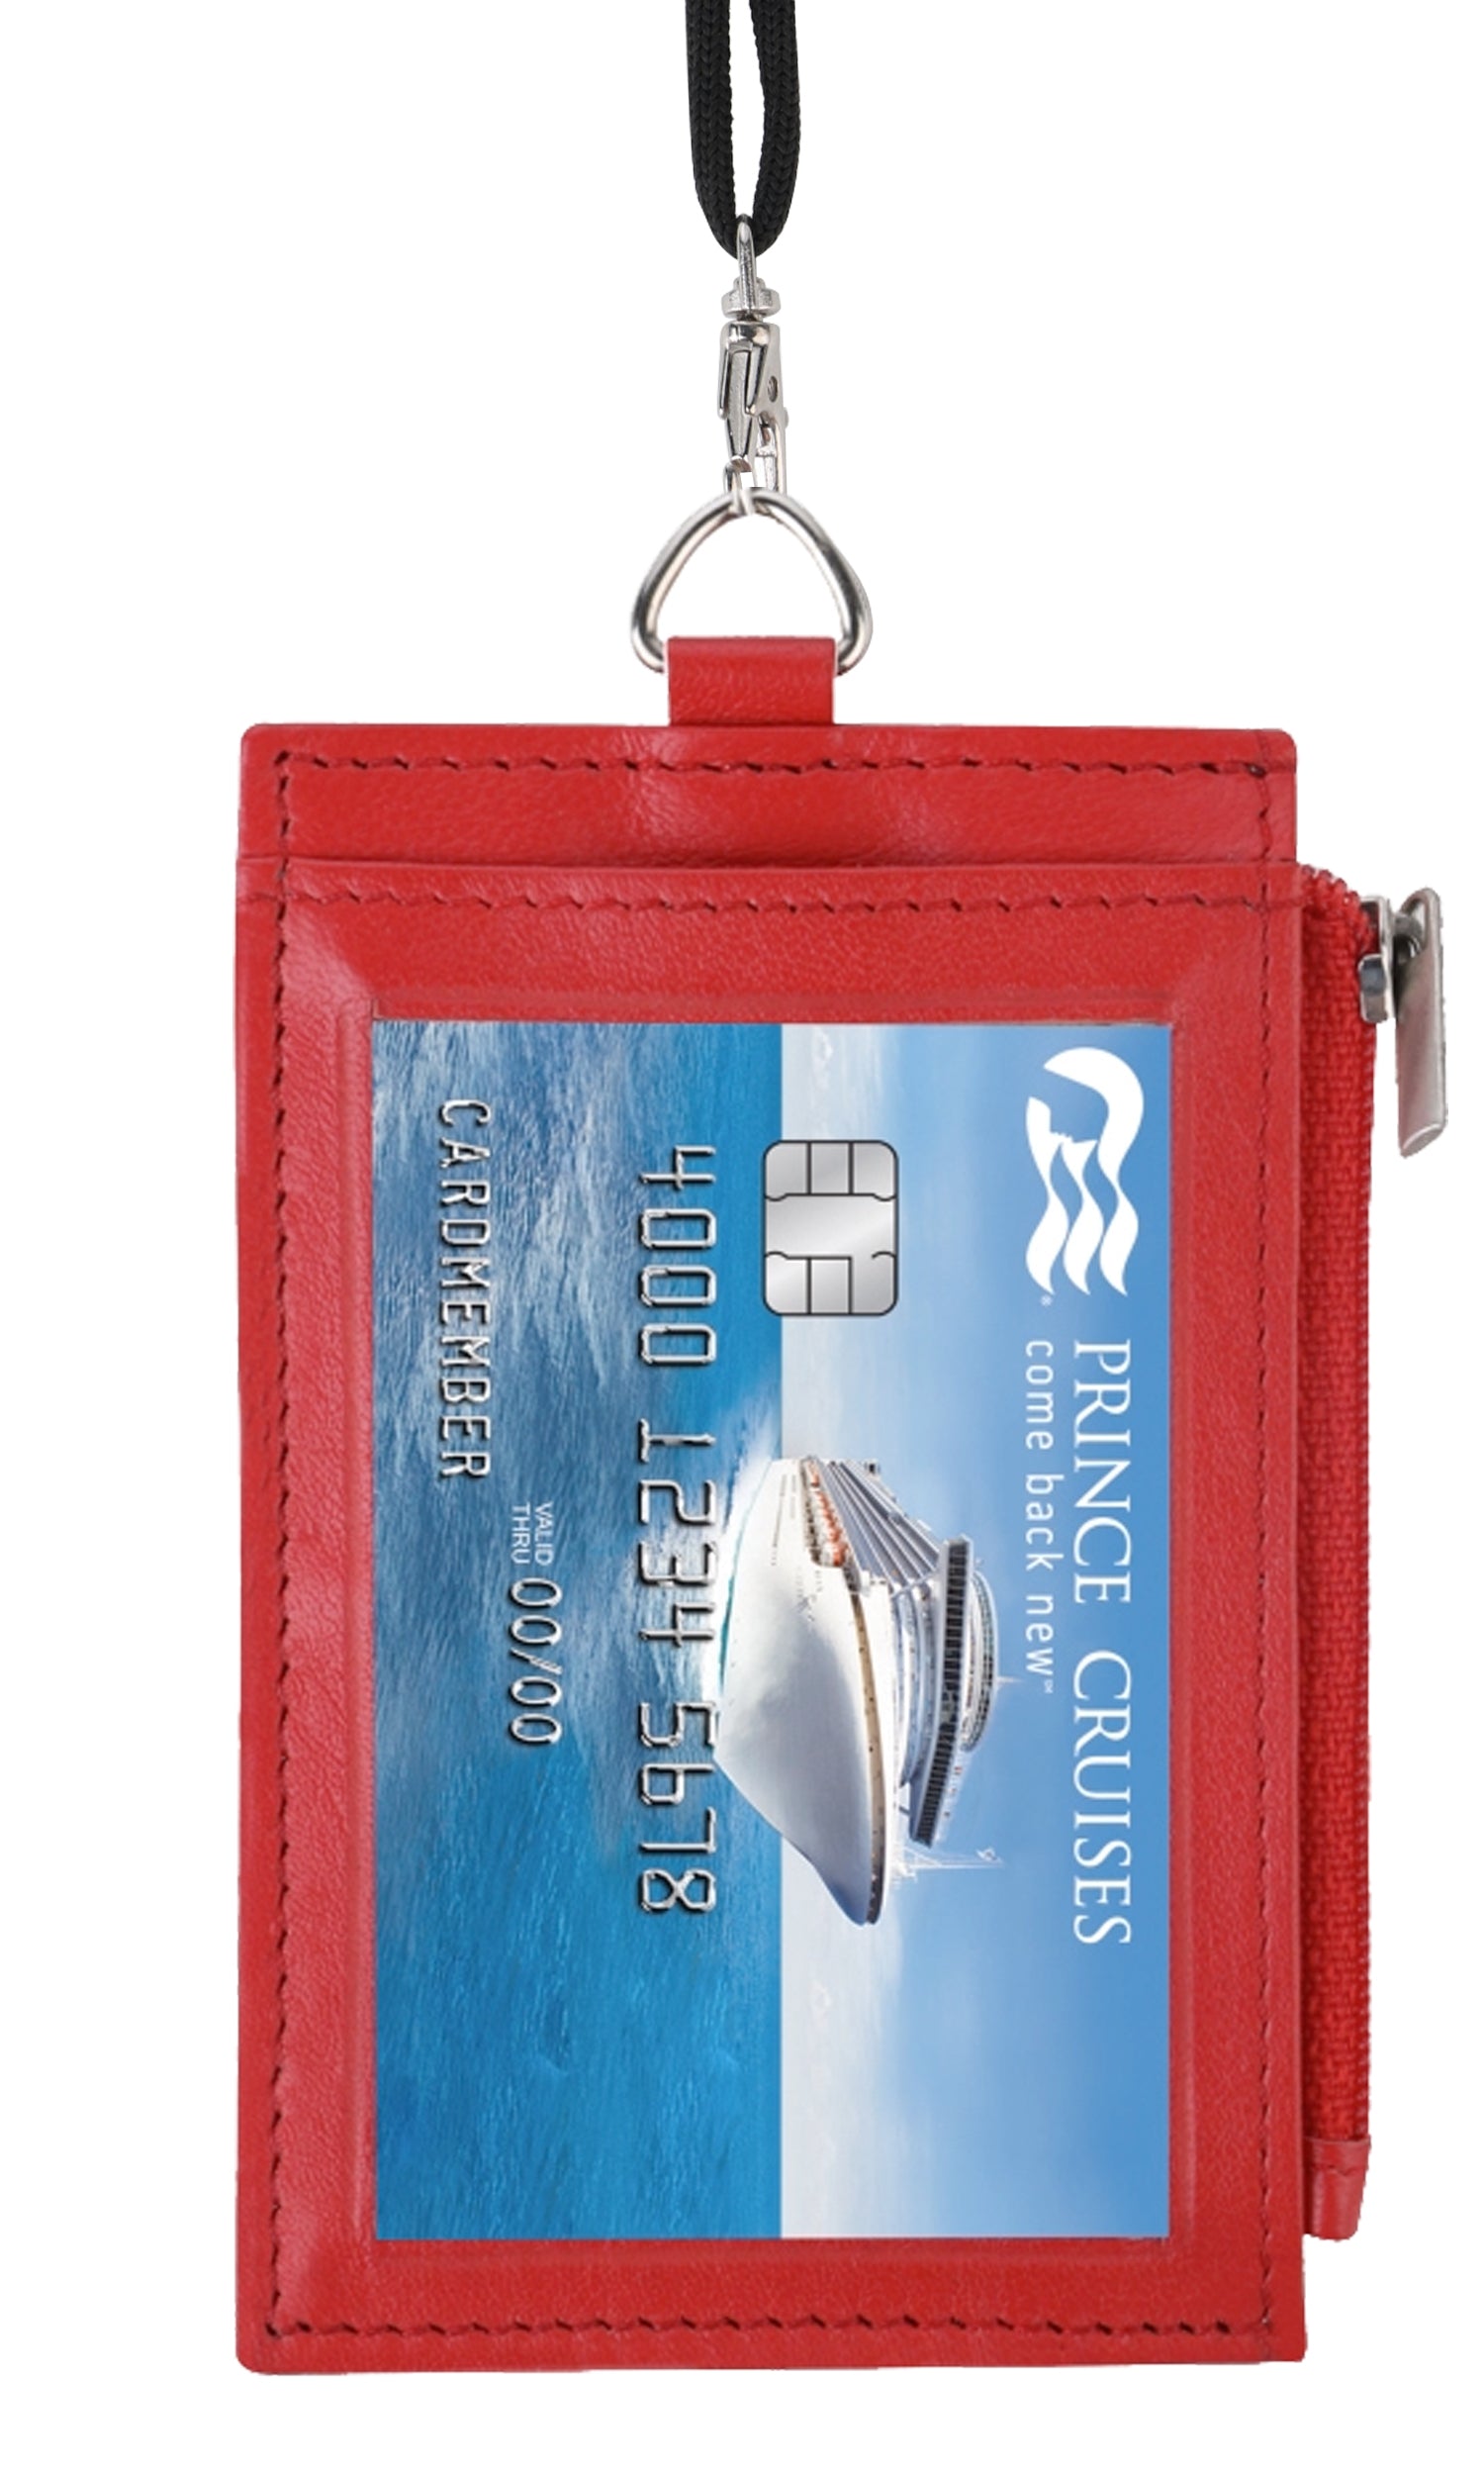 front image of red CLASSIC ID BADGE HOLDER